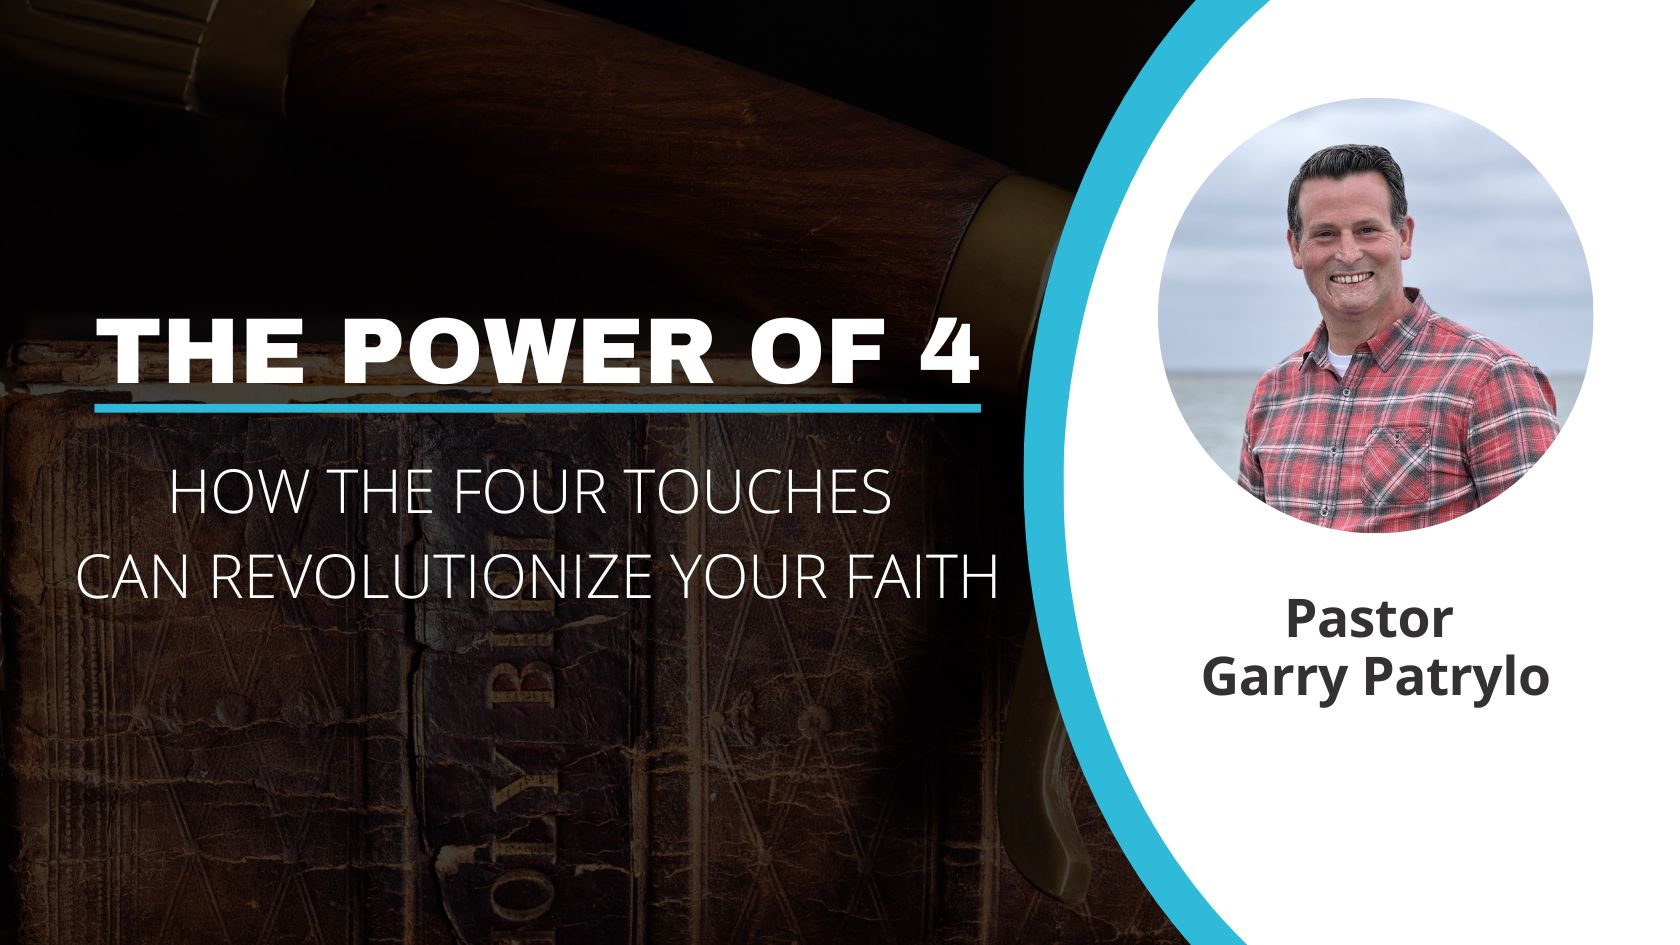 The Power of 4: How To Revolutionize Your Faith